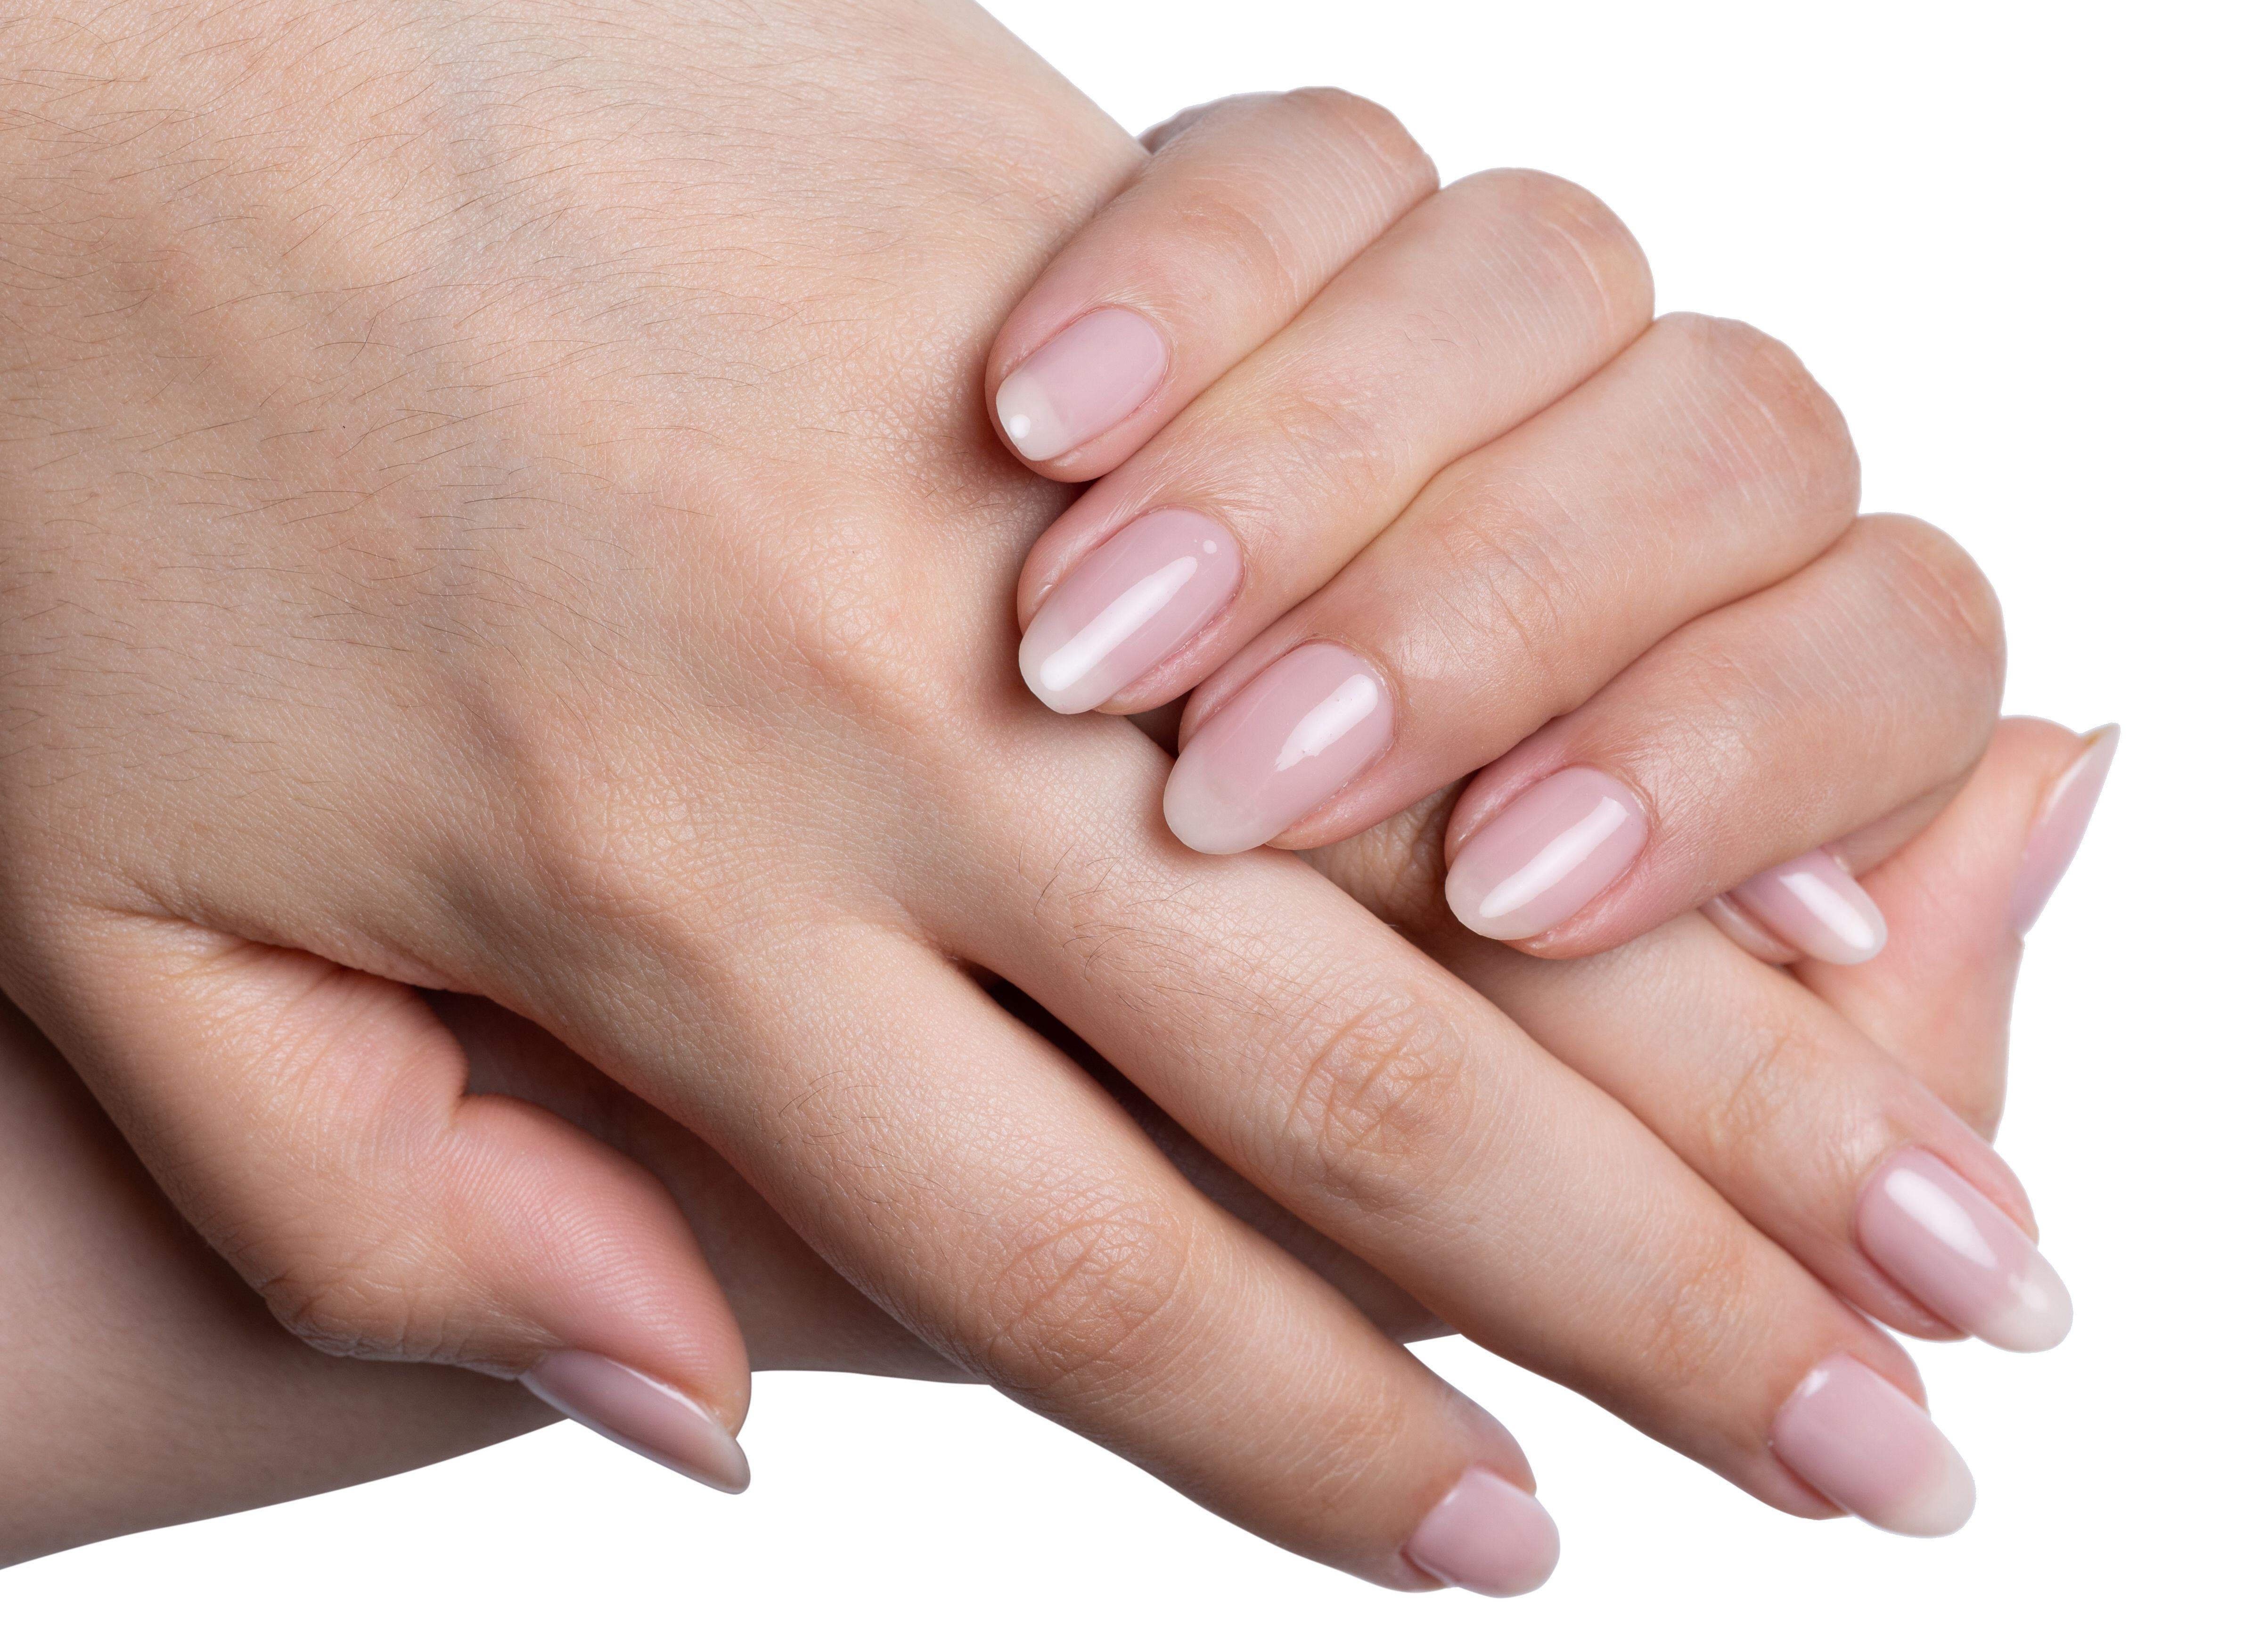 No-manicure manicure look is back with supernatural nails (Alamy/PA)